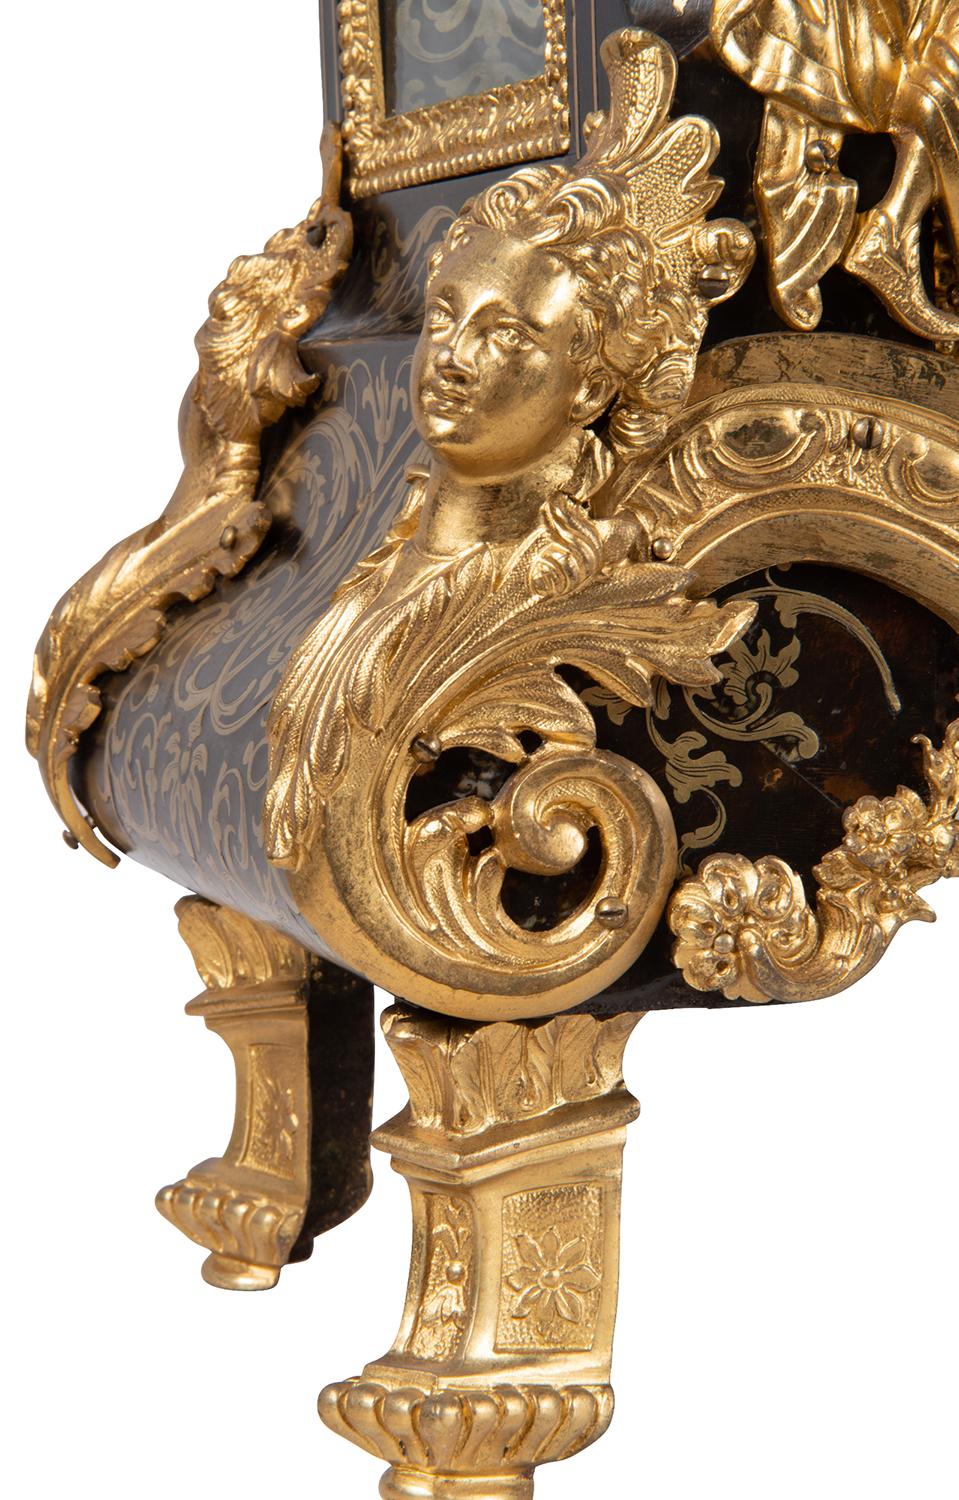 A very good quality 19th century French Boulle inlaid mantel clock having wonderful classical brass inlay to the tortoiseshell ground, a gilded ormolu finial of Boudica above the eight day duration chiming movement. Enamel porcelain roman numerals,